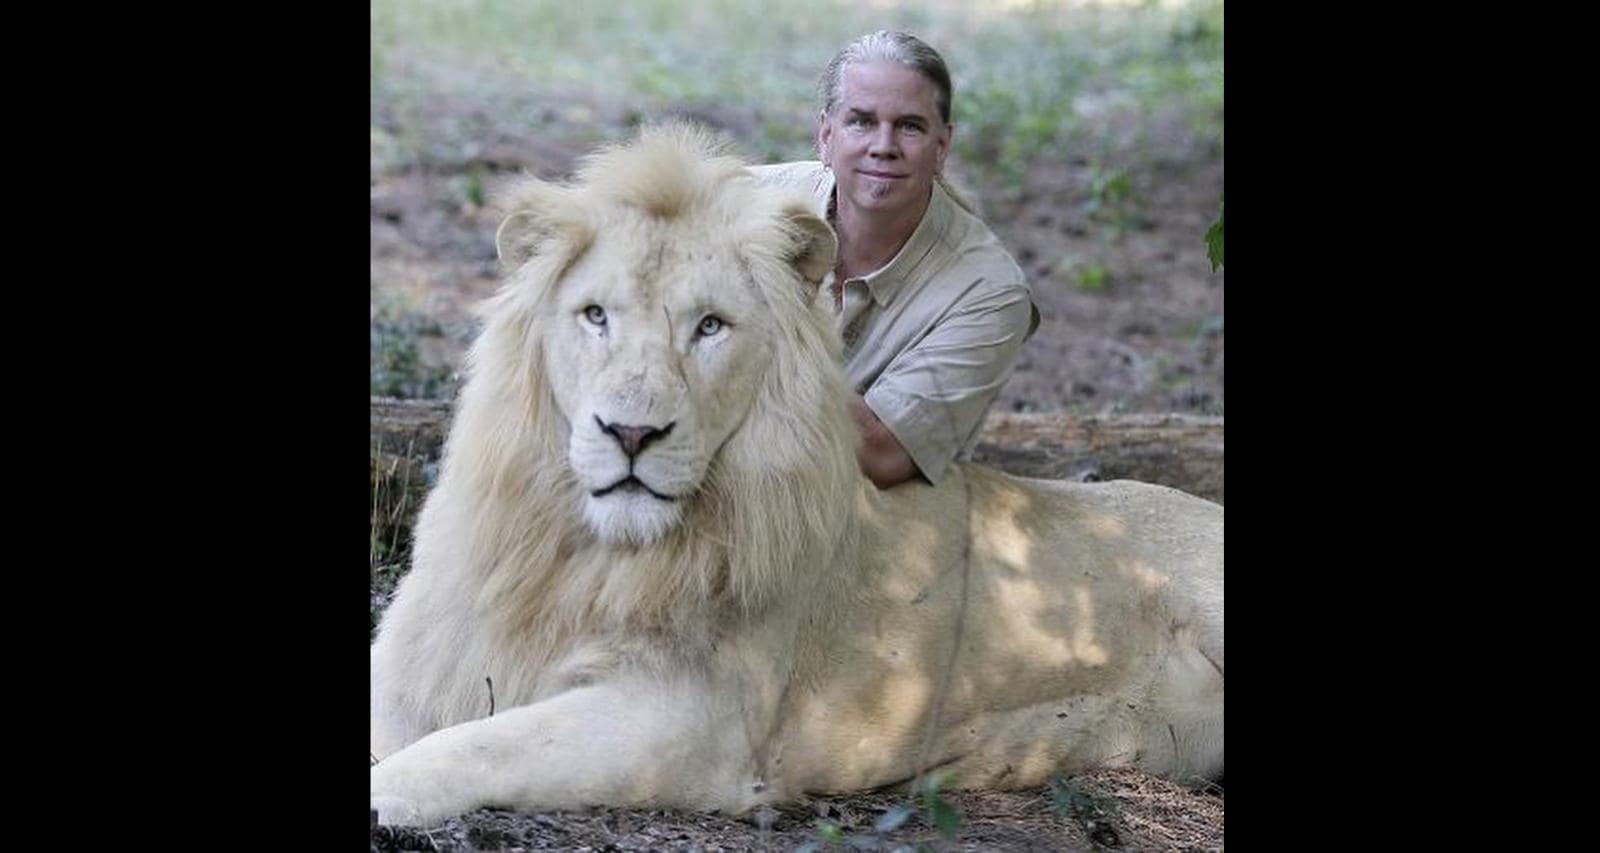 Mahamayavi Bhagwan Doc Antle Wiki, Age, Kids, Career, Early Life and Facts About The Elite Animal Trainer Seen on Netflix’s “Tiger King